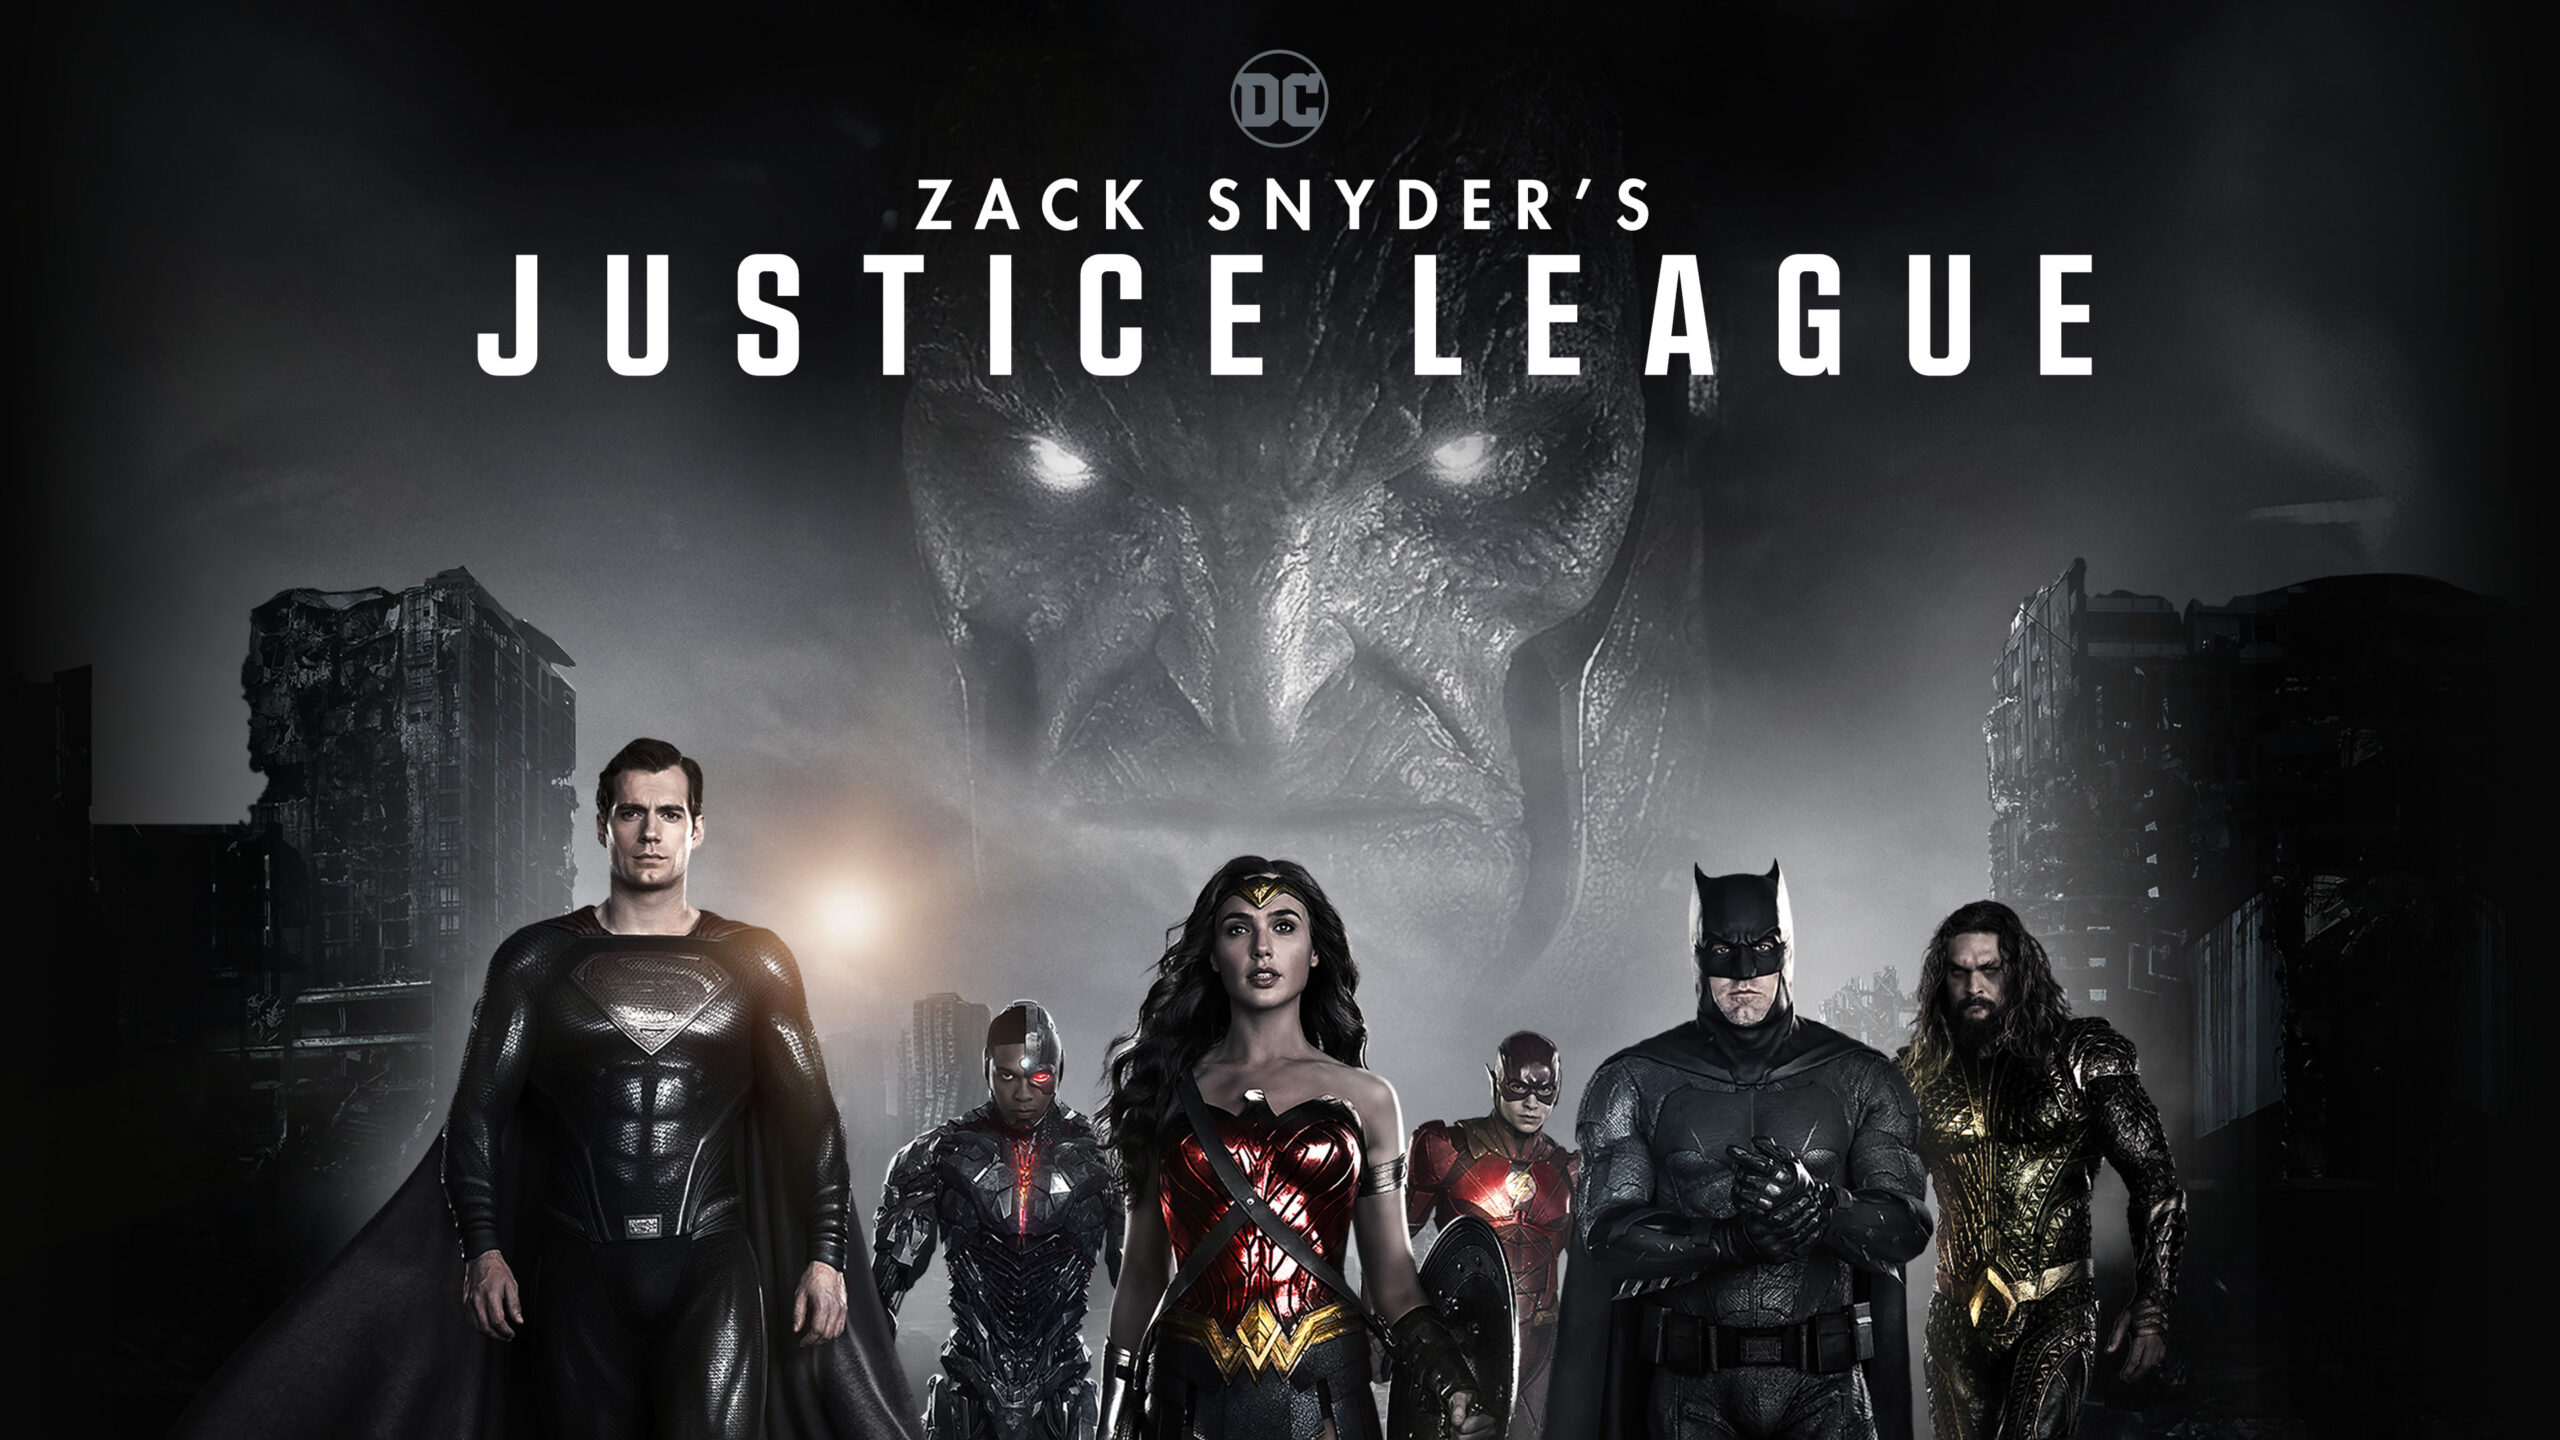 3rd-strike.com | Zack Snyder's Justice League (VOD) – Movie Review